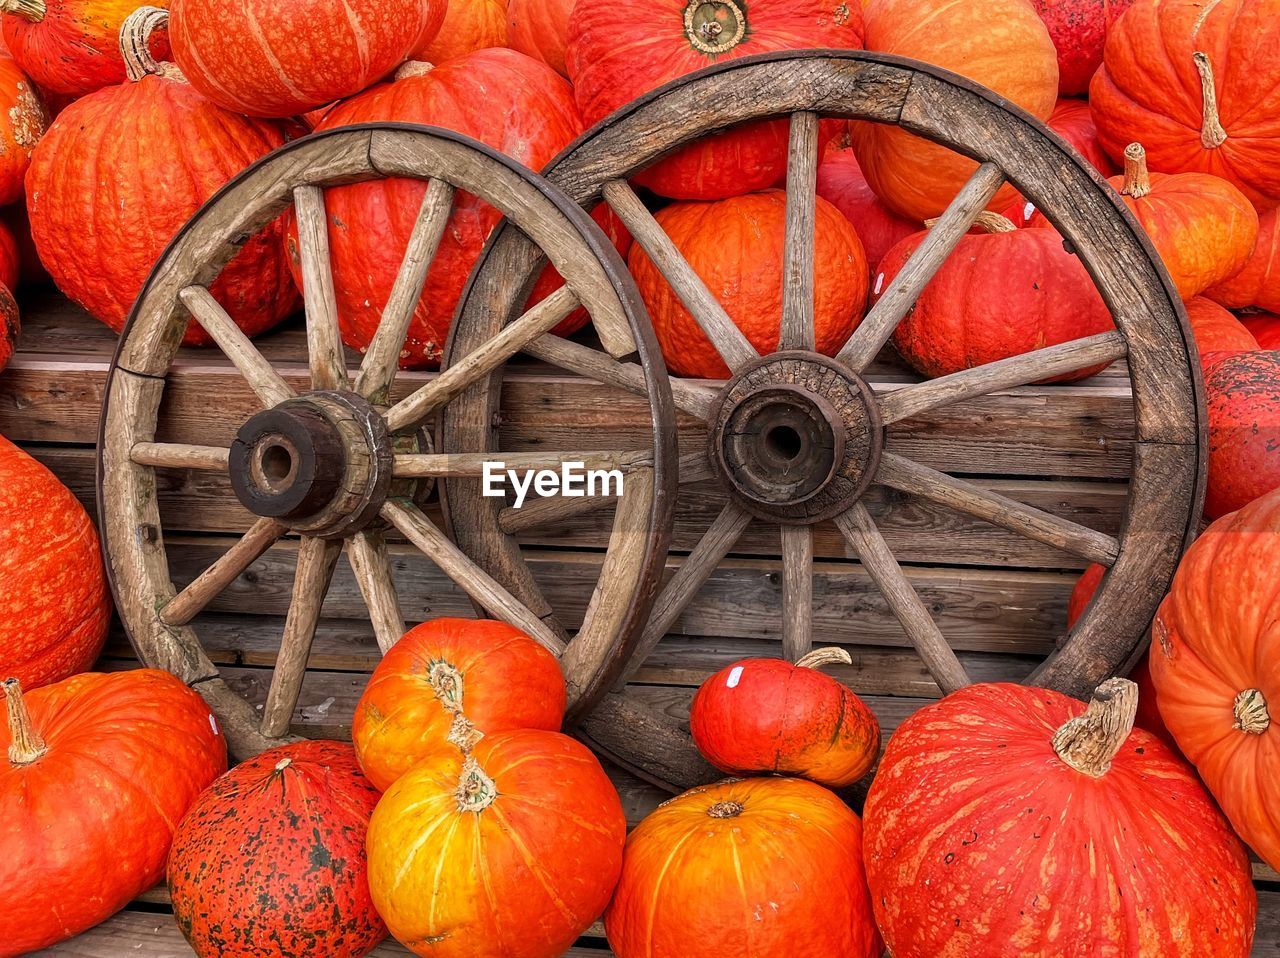 pumpkin, food and drink, food, orange color, large group of objects, no people, squash, wood, vegetable, produce, abundance, wheel, day, healthy eating, red, outdoors, autumn, backgrounds, plant, freshness, shape, celebration, agriculture